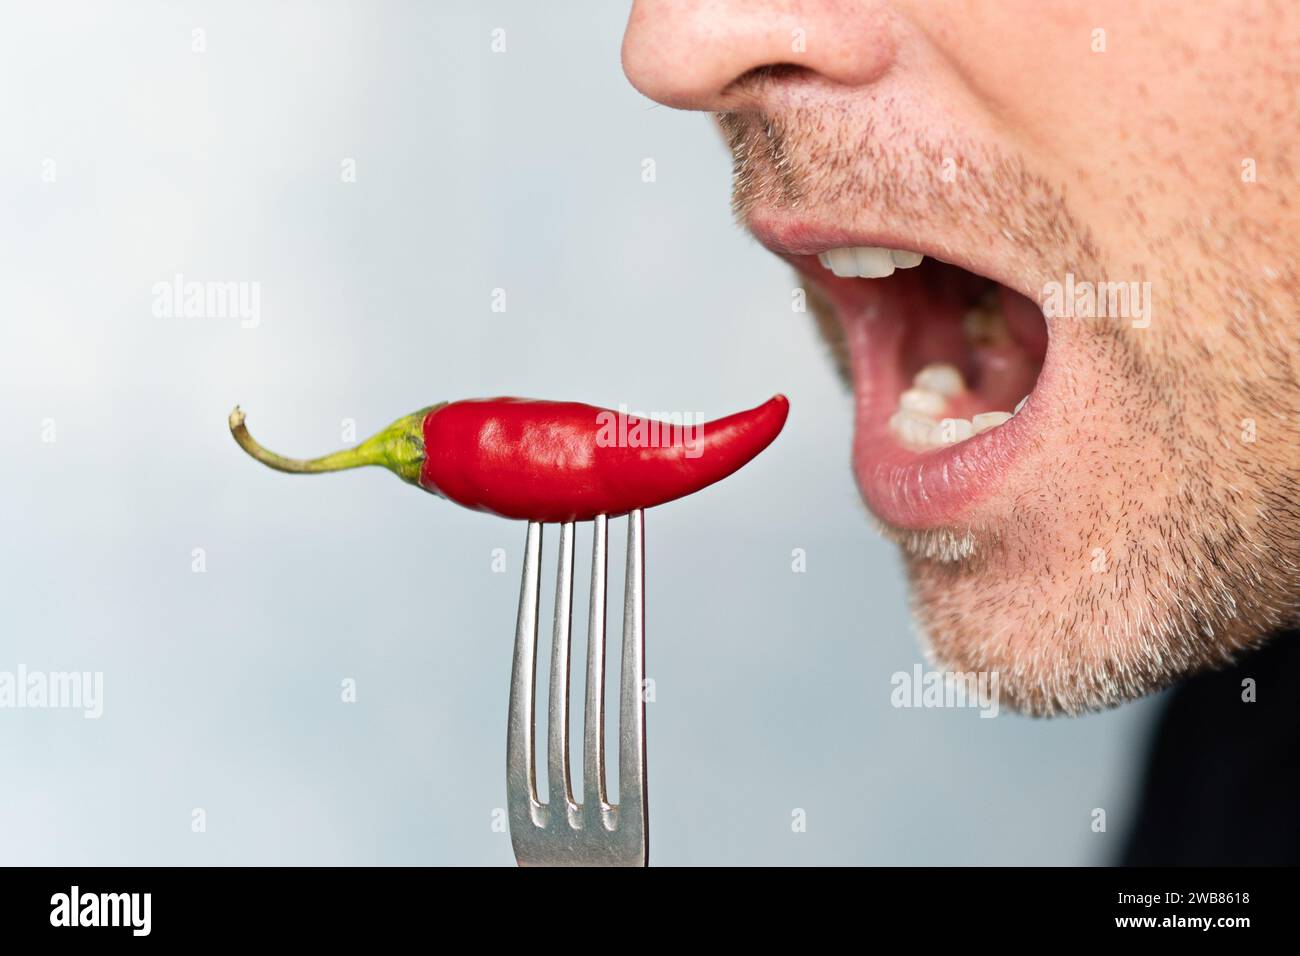 Expressive and funny man holding a whole red chili pepper in his mouth. Man eating a spicy pepper on a blue background. Extra hot cayenne pepper. Stock Photo